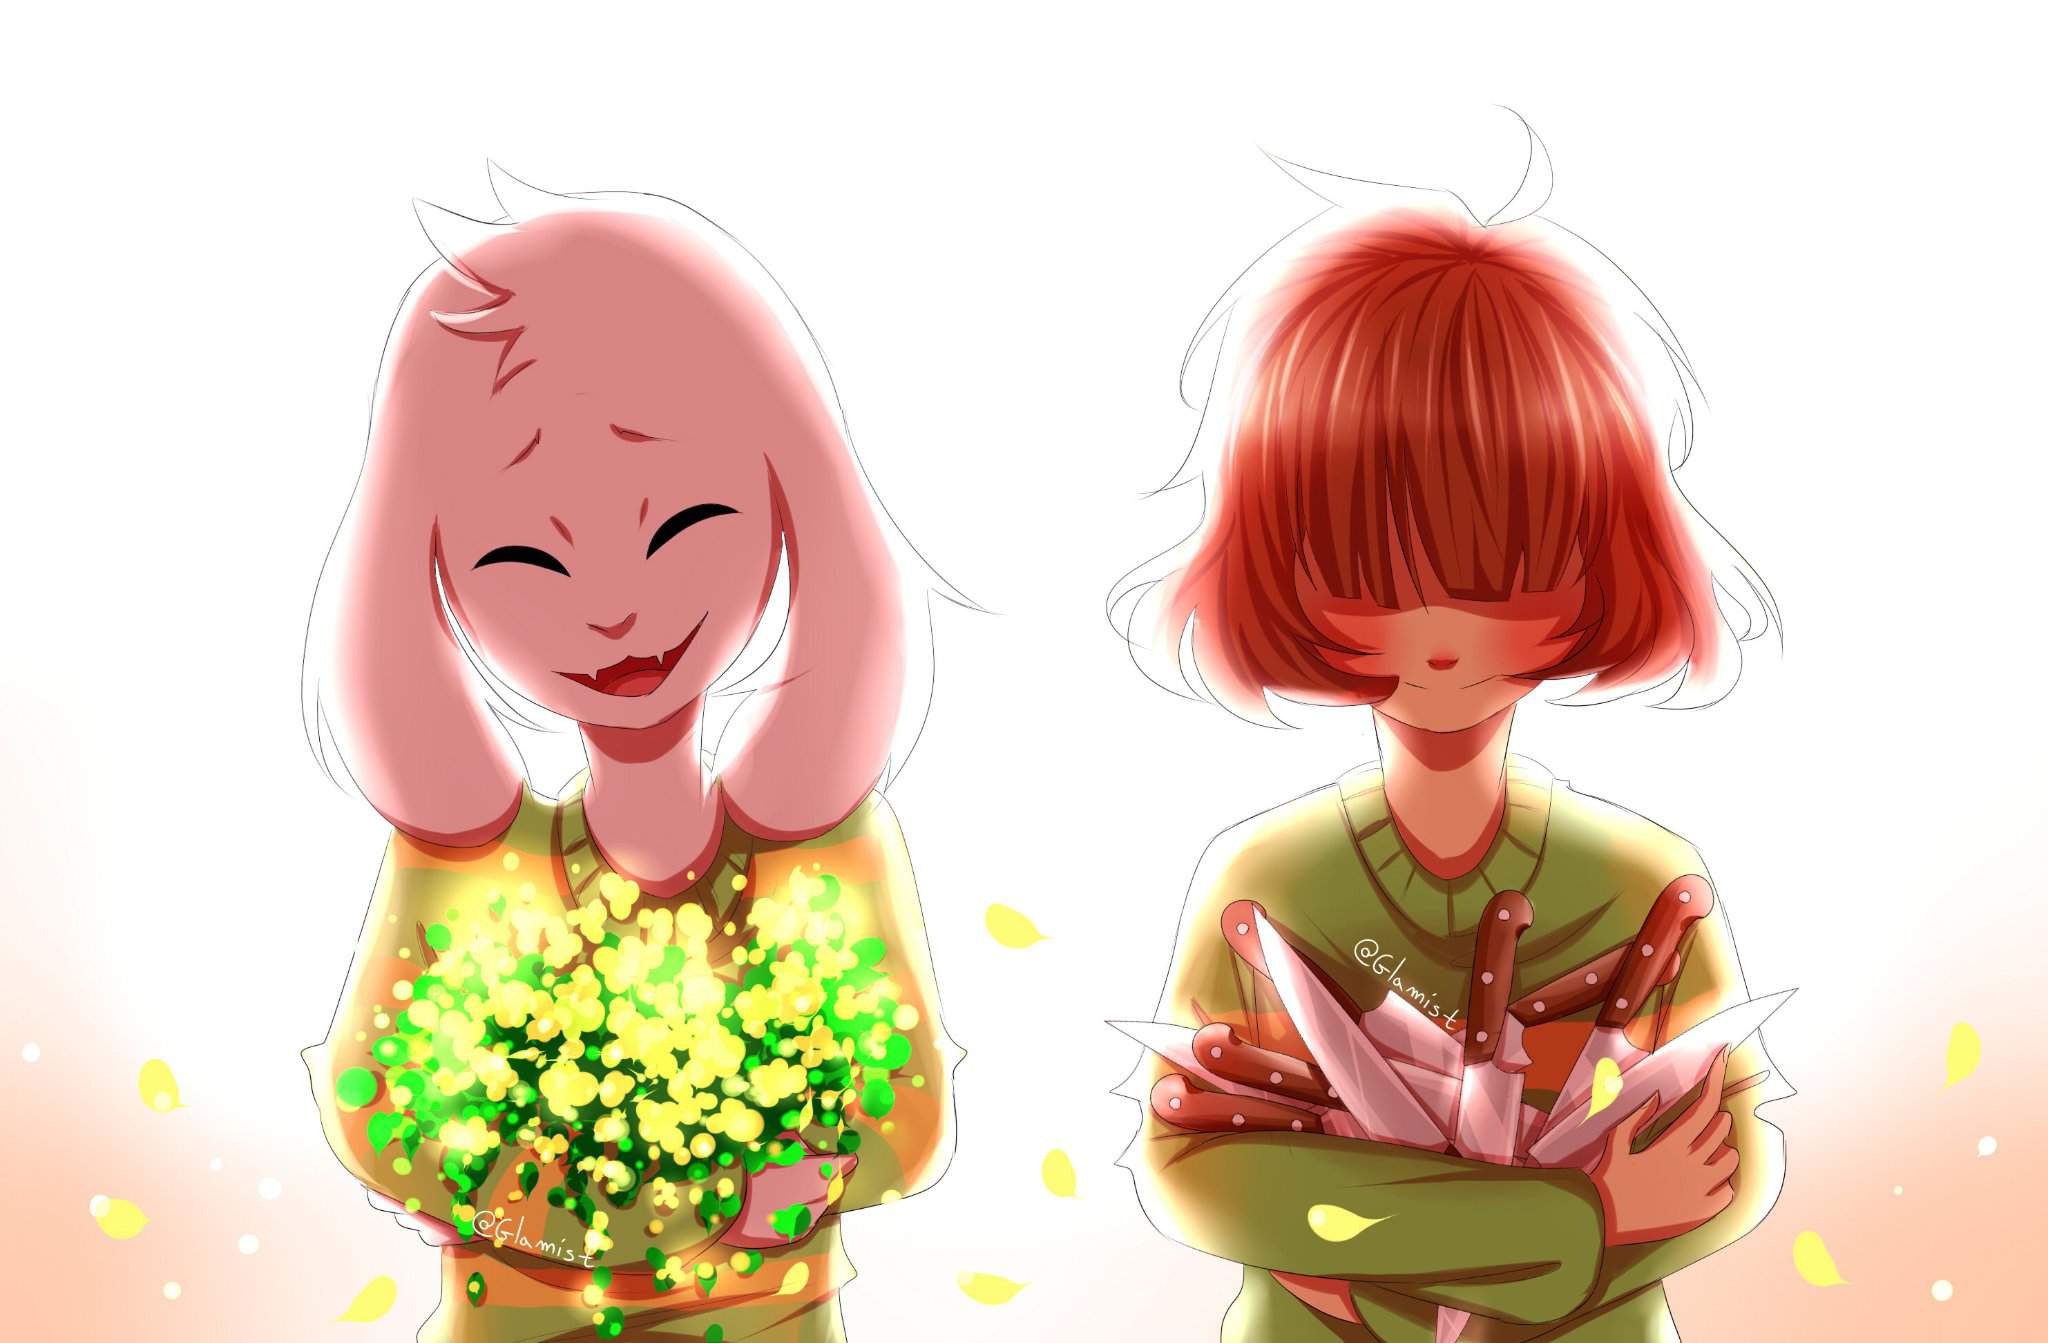 Undertale Chara and Asriel